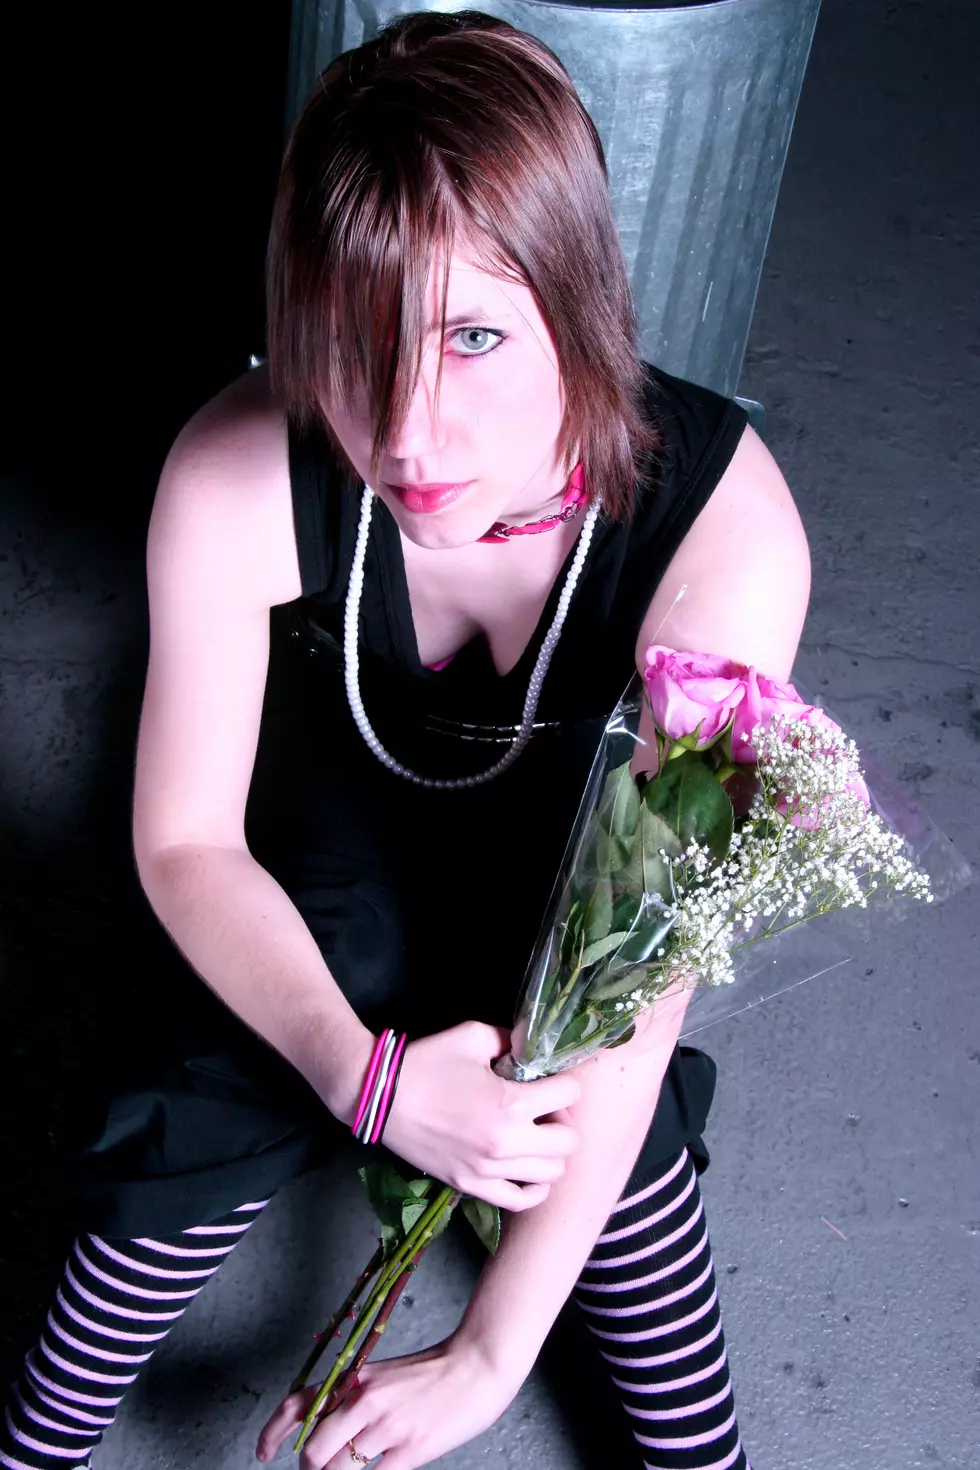 Yes, There Is A Myspace Emo Prom Coming To Michigan